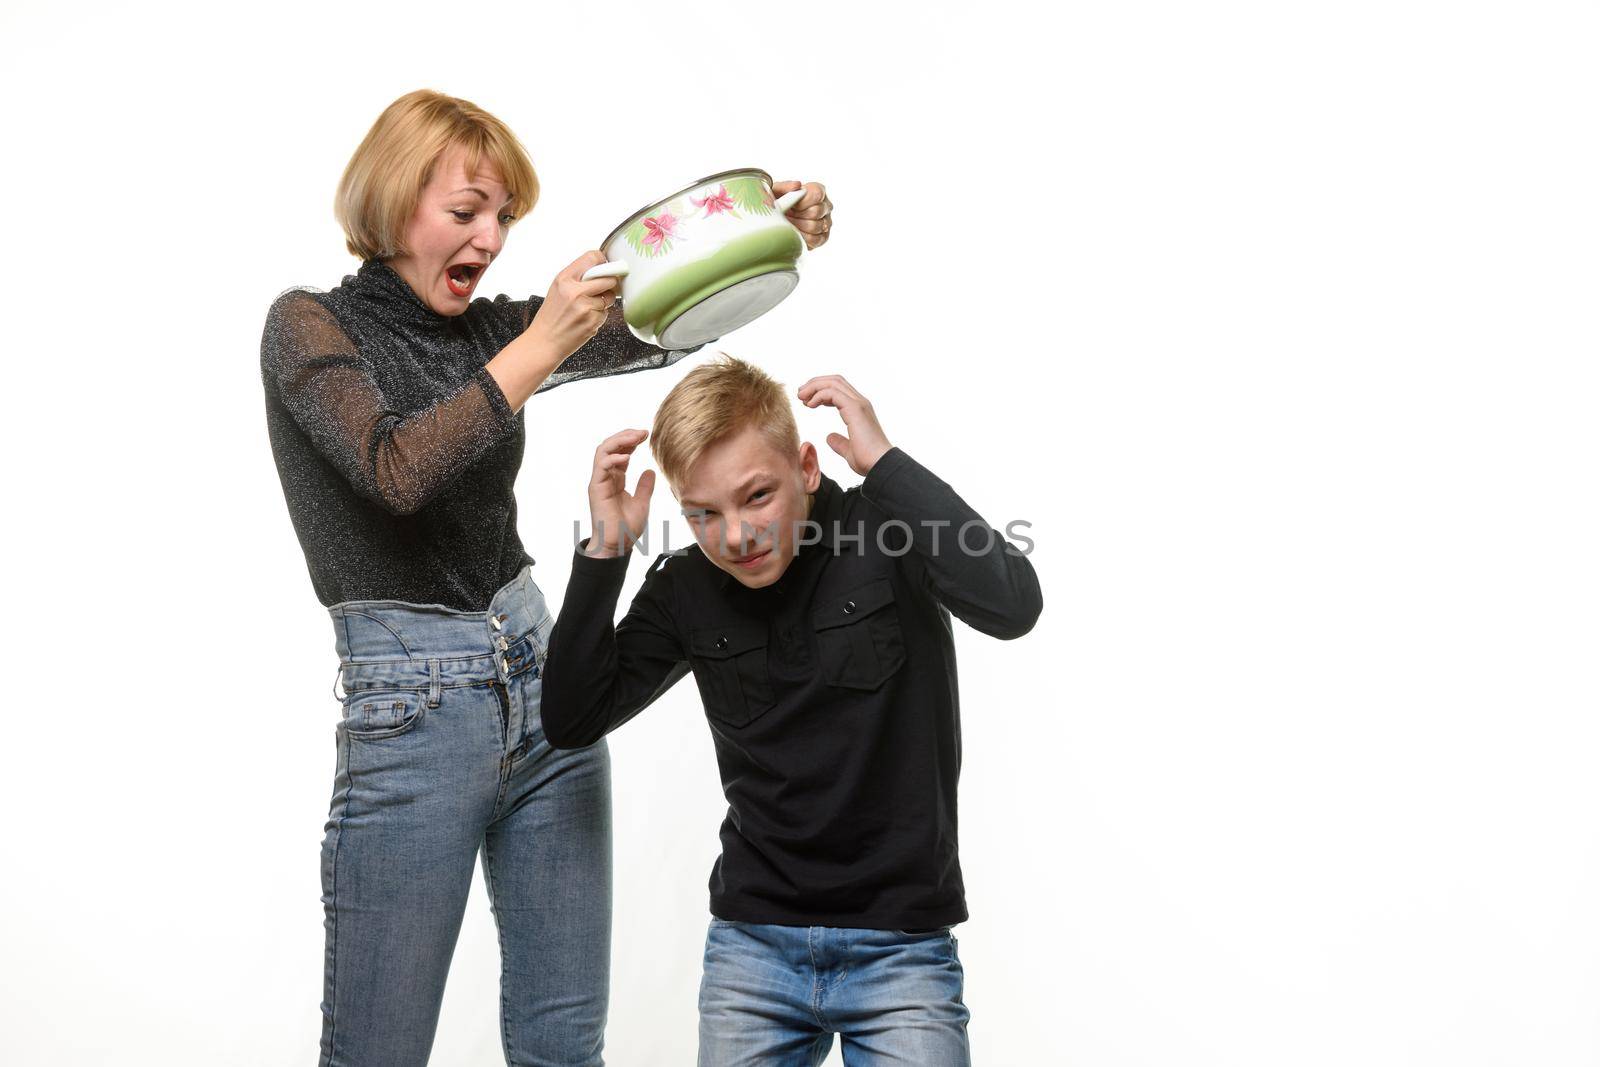 Mom hits her son with a pan because he refuses to eat home-cooked food by Madhourse